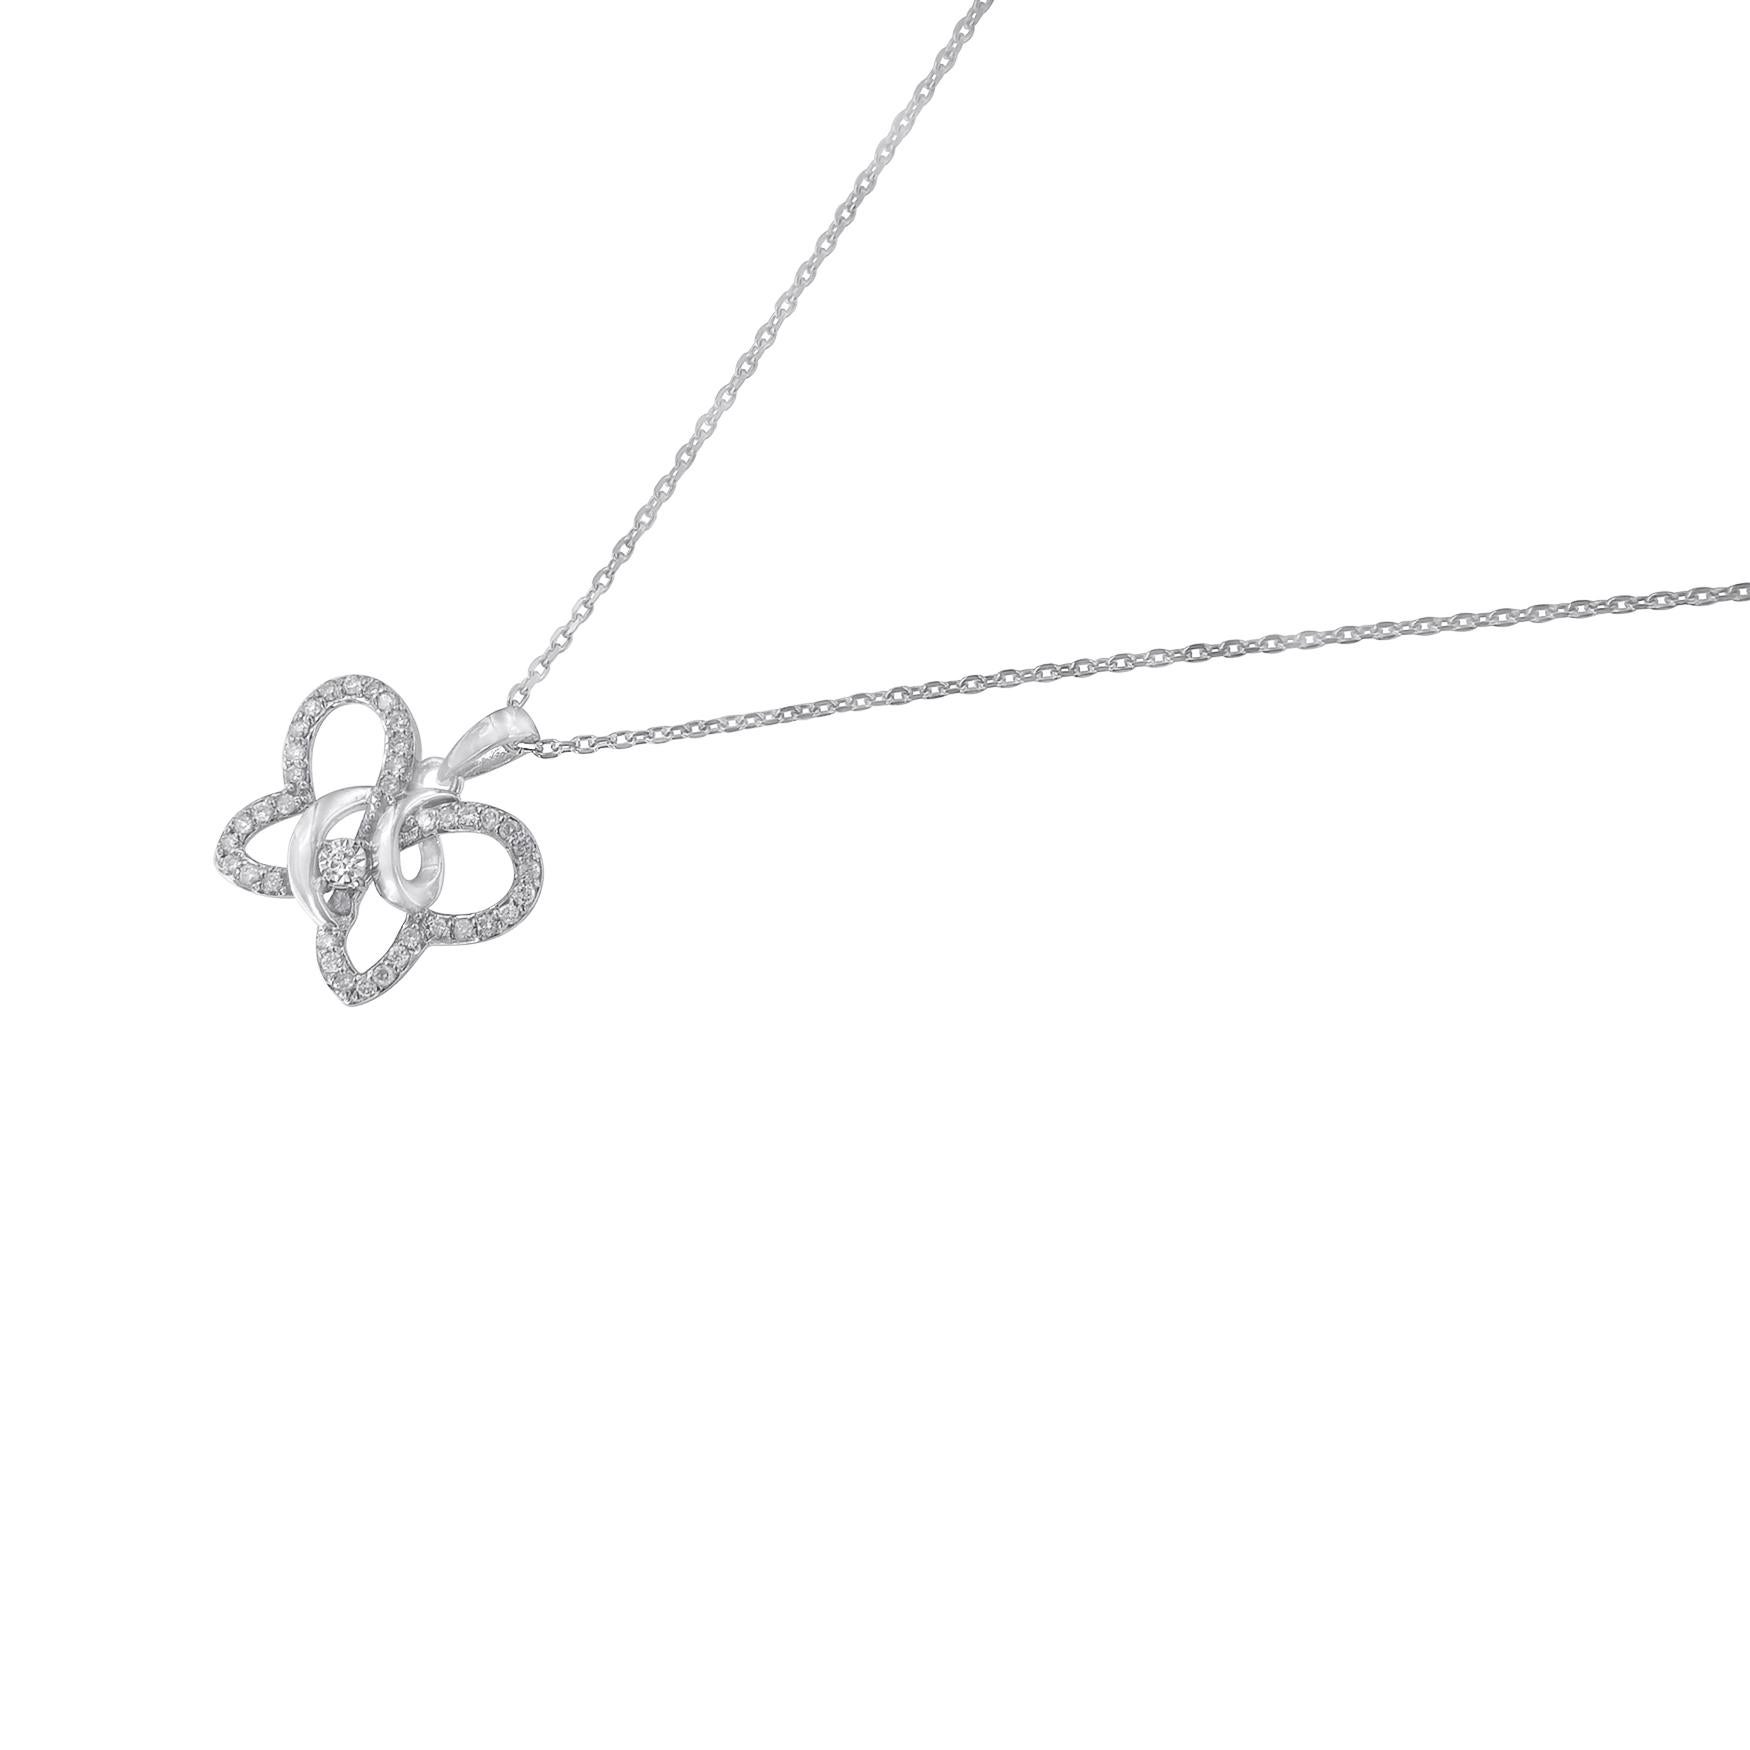 Contemporary .925 Sterling Silver 1/4 Carat Diamond Butterfly Pendant Necklace with Box Chain For Sale